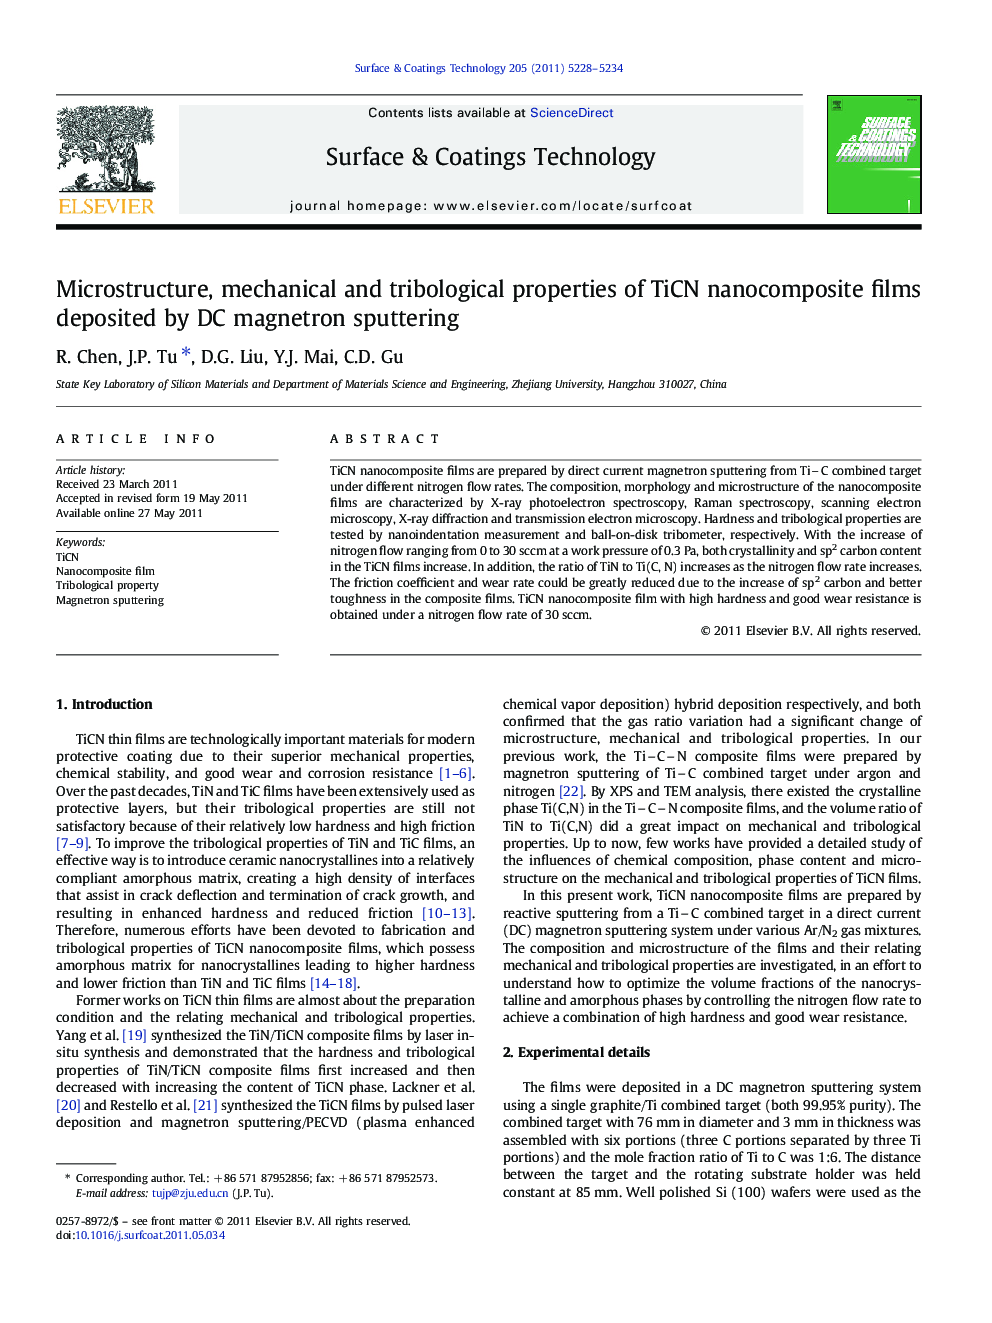 Microstructure, mechanical and tribological properties of TiCN nanocomposite films deposited by DC magnetron sputtering